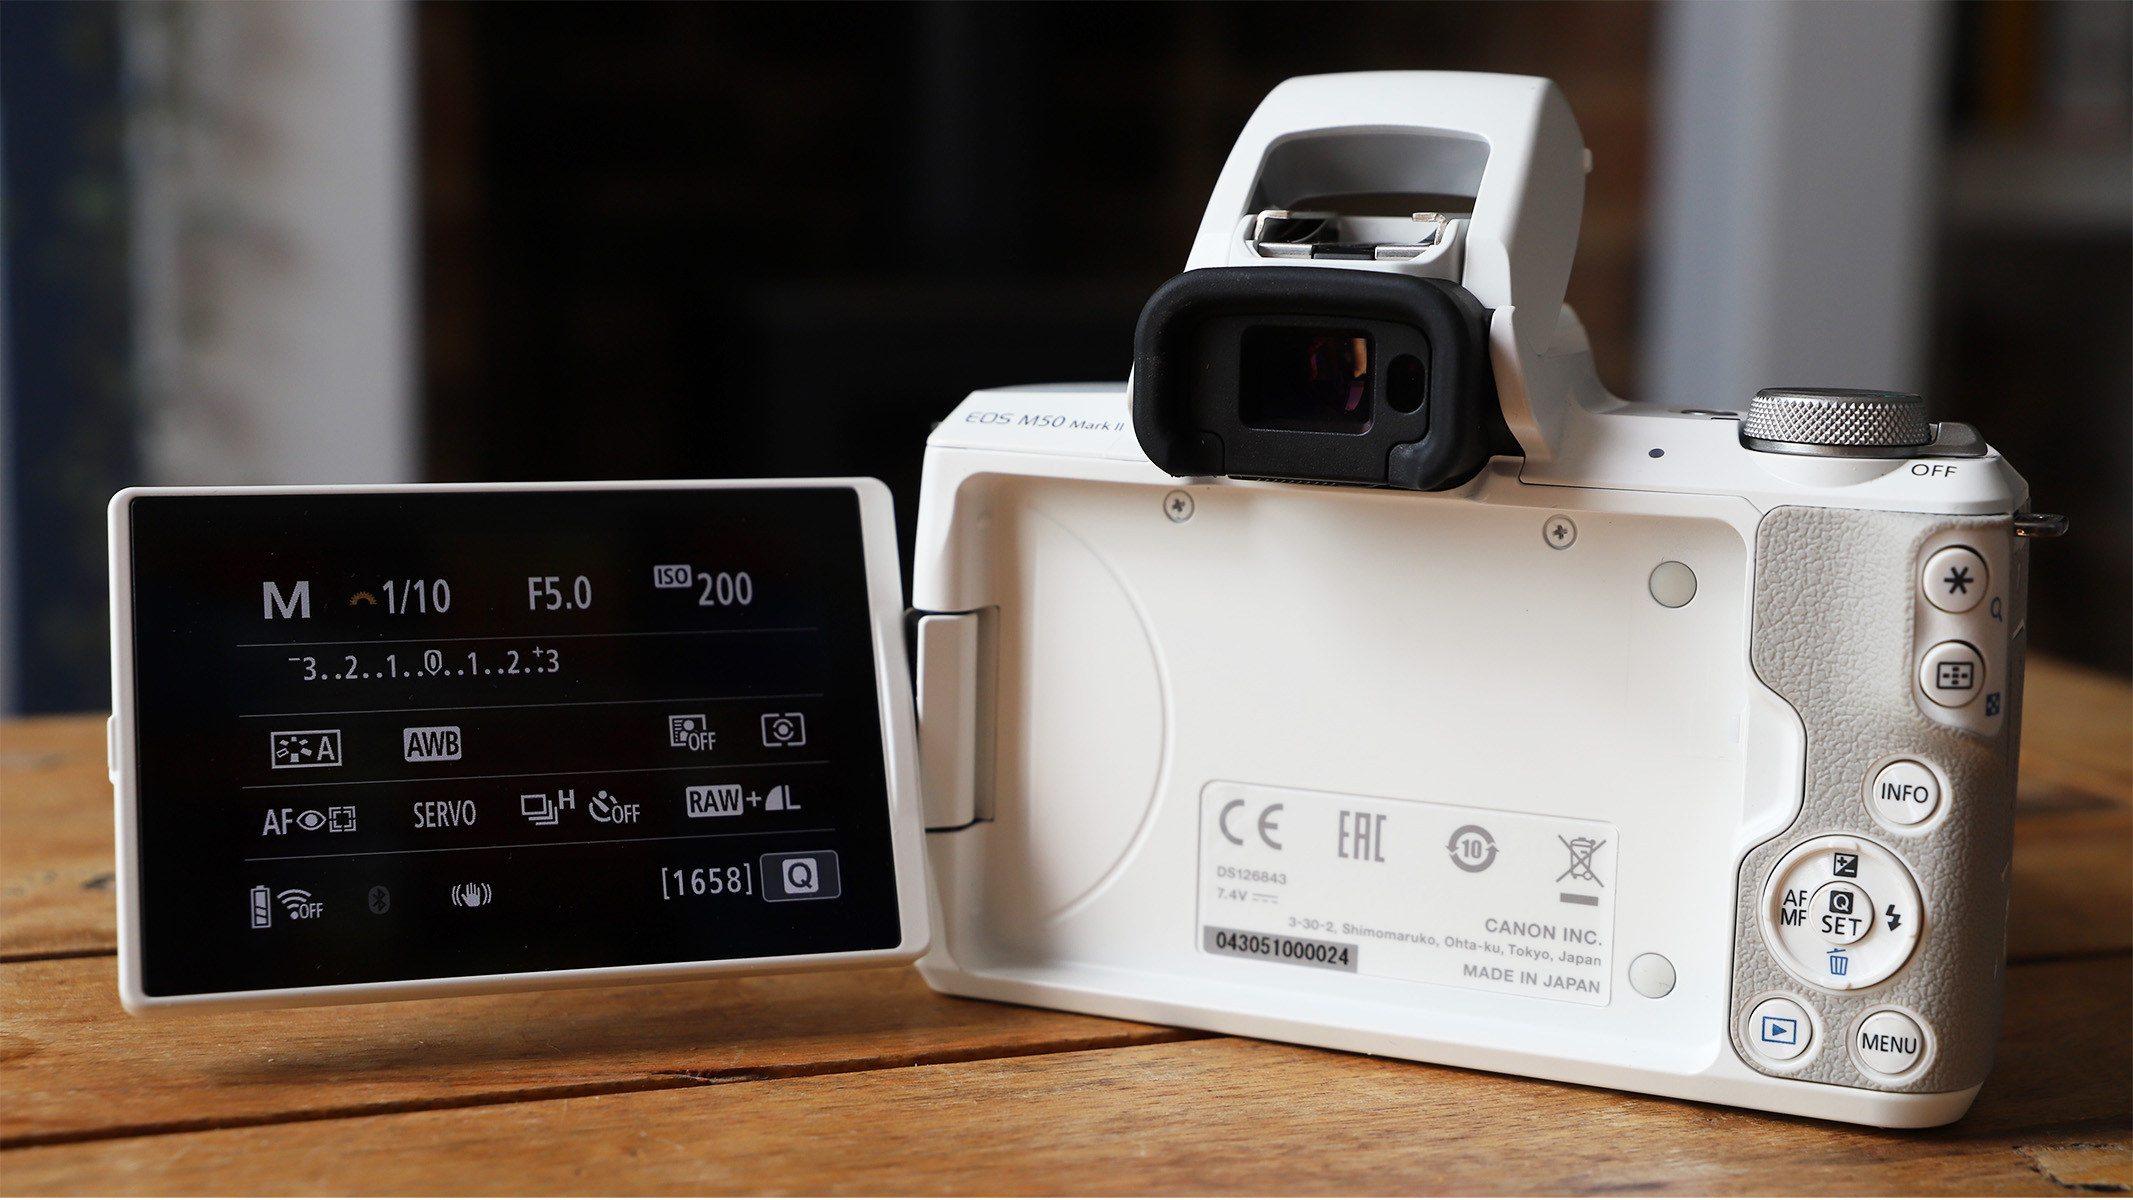 Image shows rear of the camera with the screen tilted out